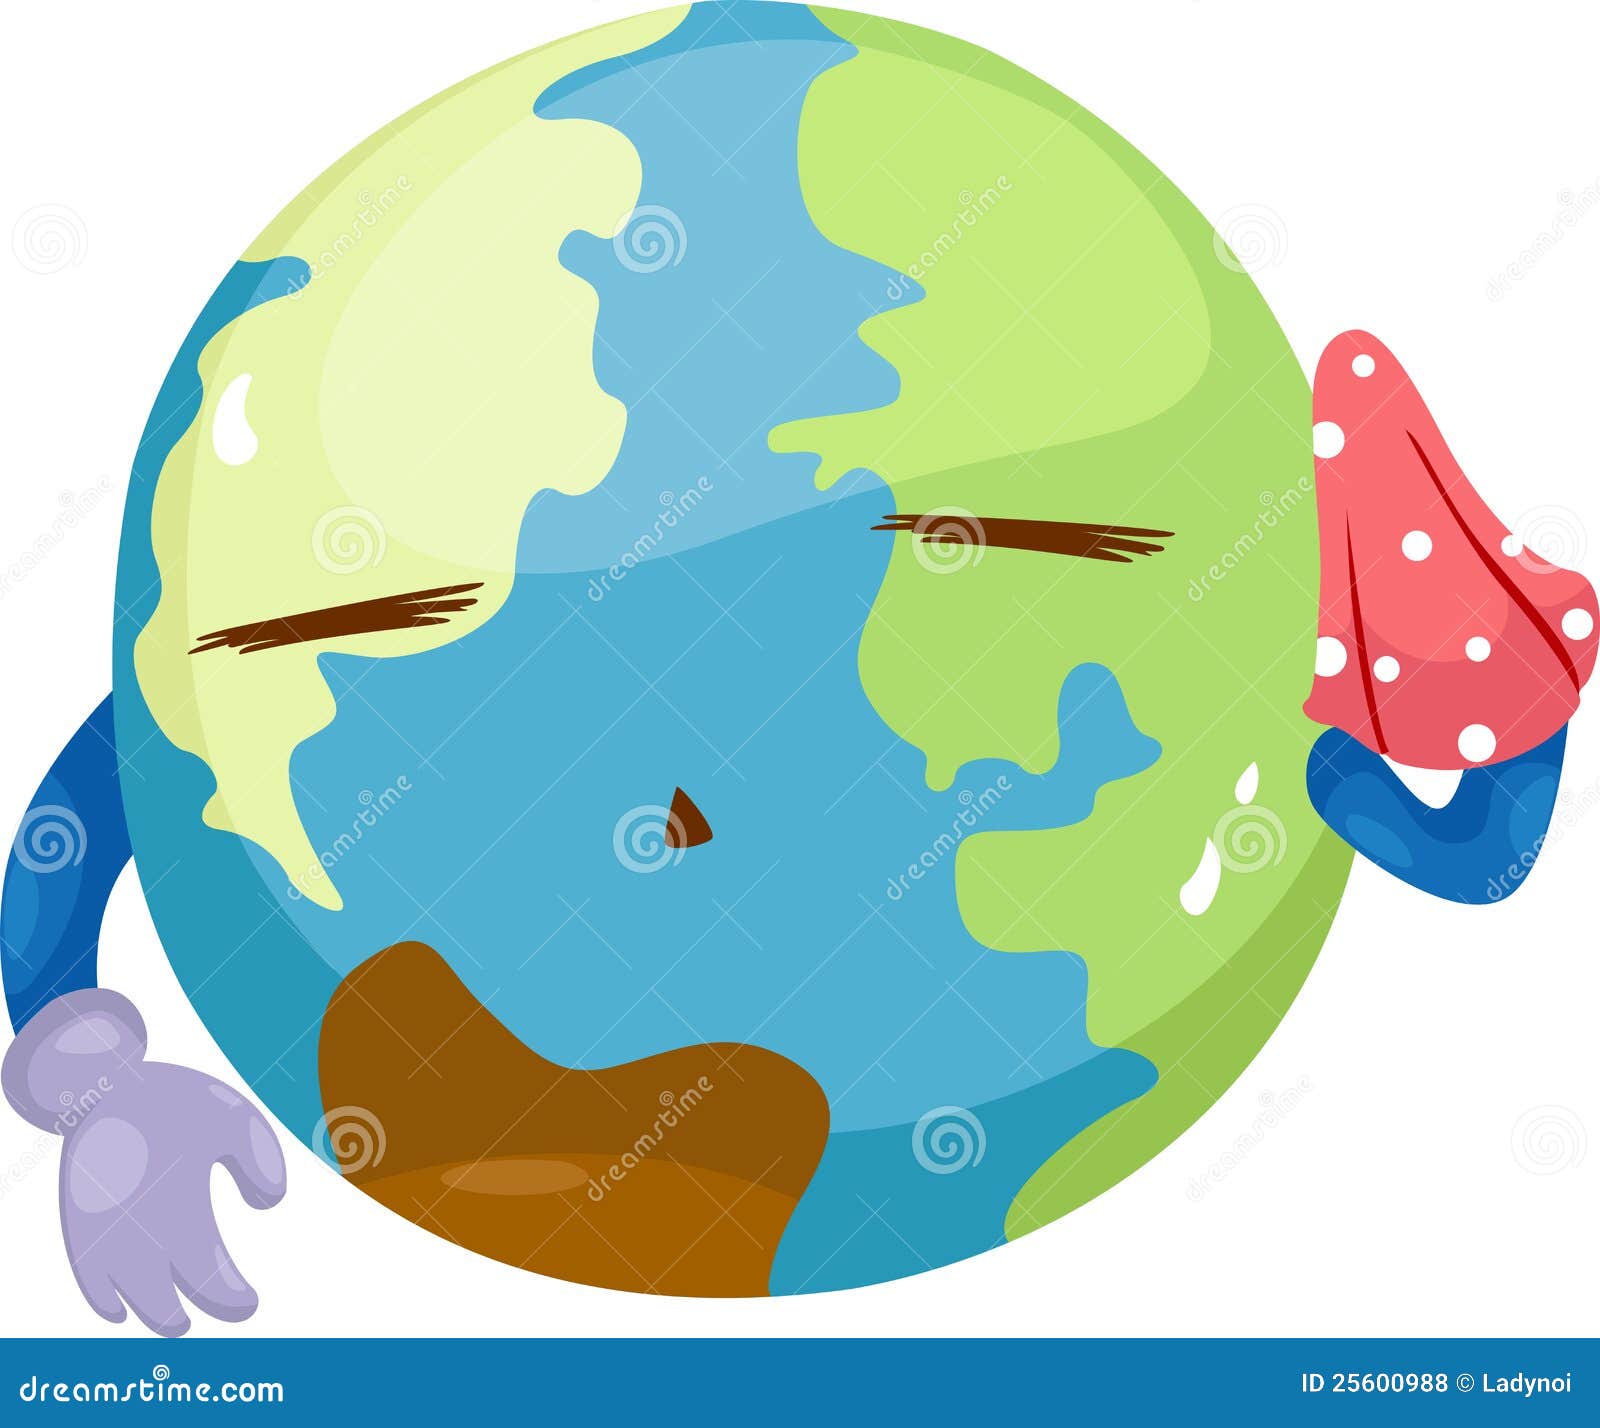 global warming clipart - photo #31